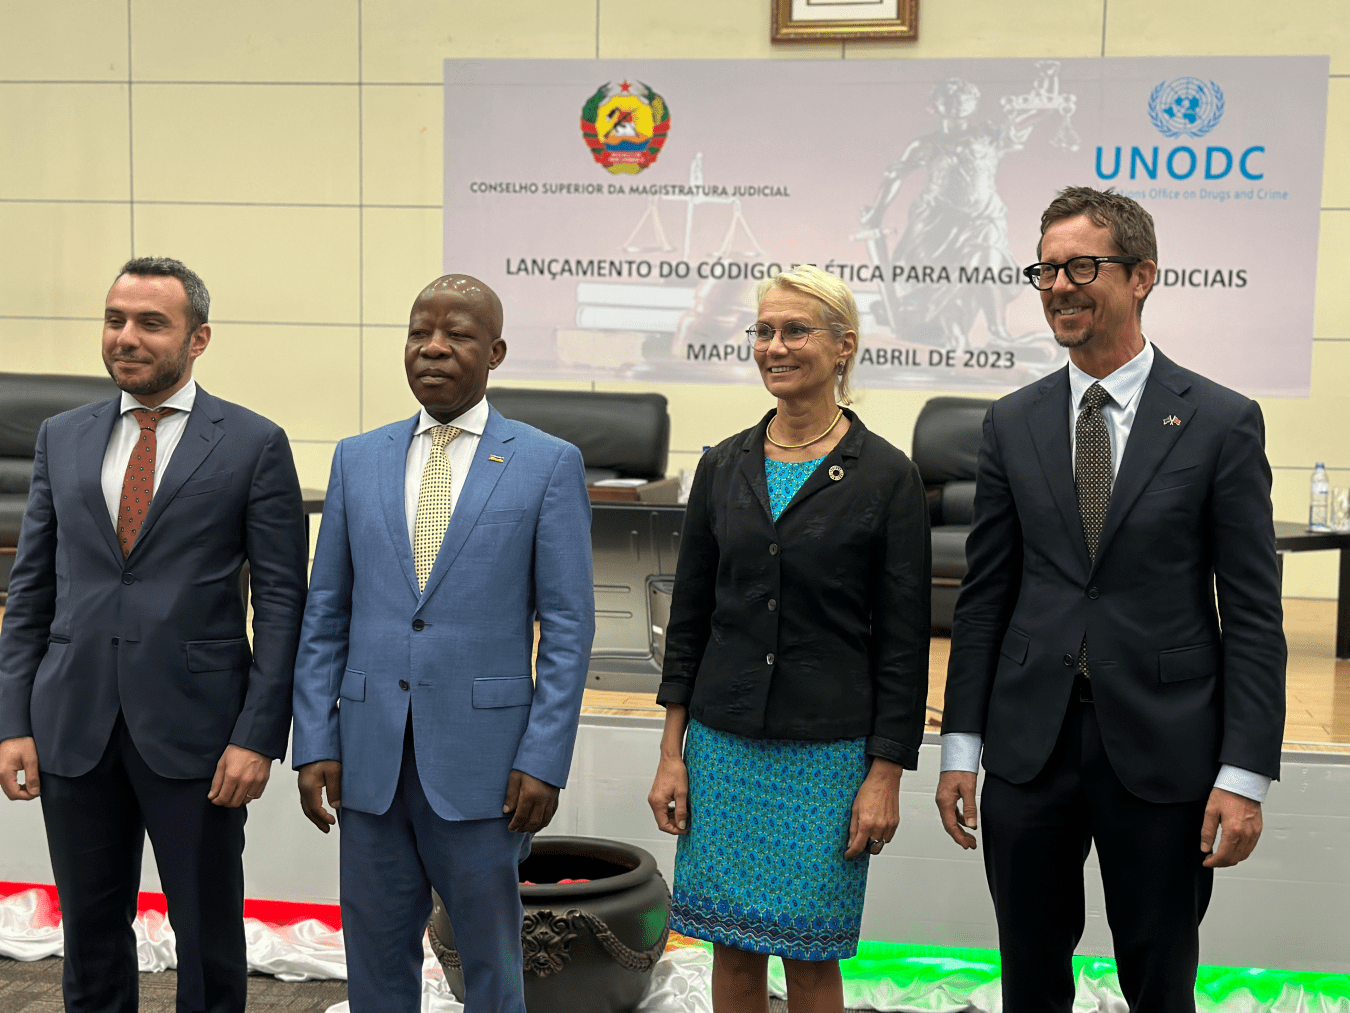 <p><em><span style="color: #808080;">Caption: From left to right: Antonio De Vivo, OiC UNODC Programme Office in Mozambique, H.E. Adelino Manuel Muchanga, Supreme Court Chief Justice, Myrta Kaulard, United Nations Resident Coordinator in Mozambique, and H.E. Haakon Gram-Johannessen, Ambassador of Norway to Mozambique. © UNODC</span></em></p>